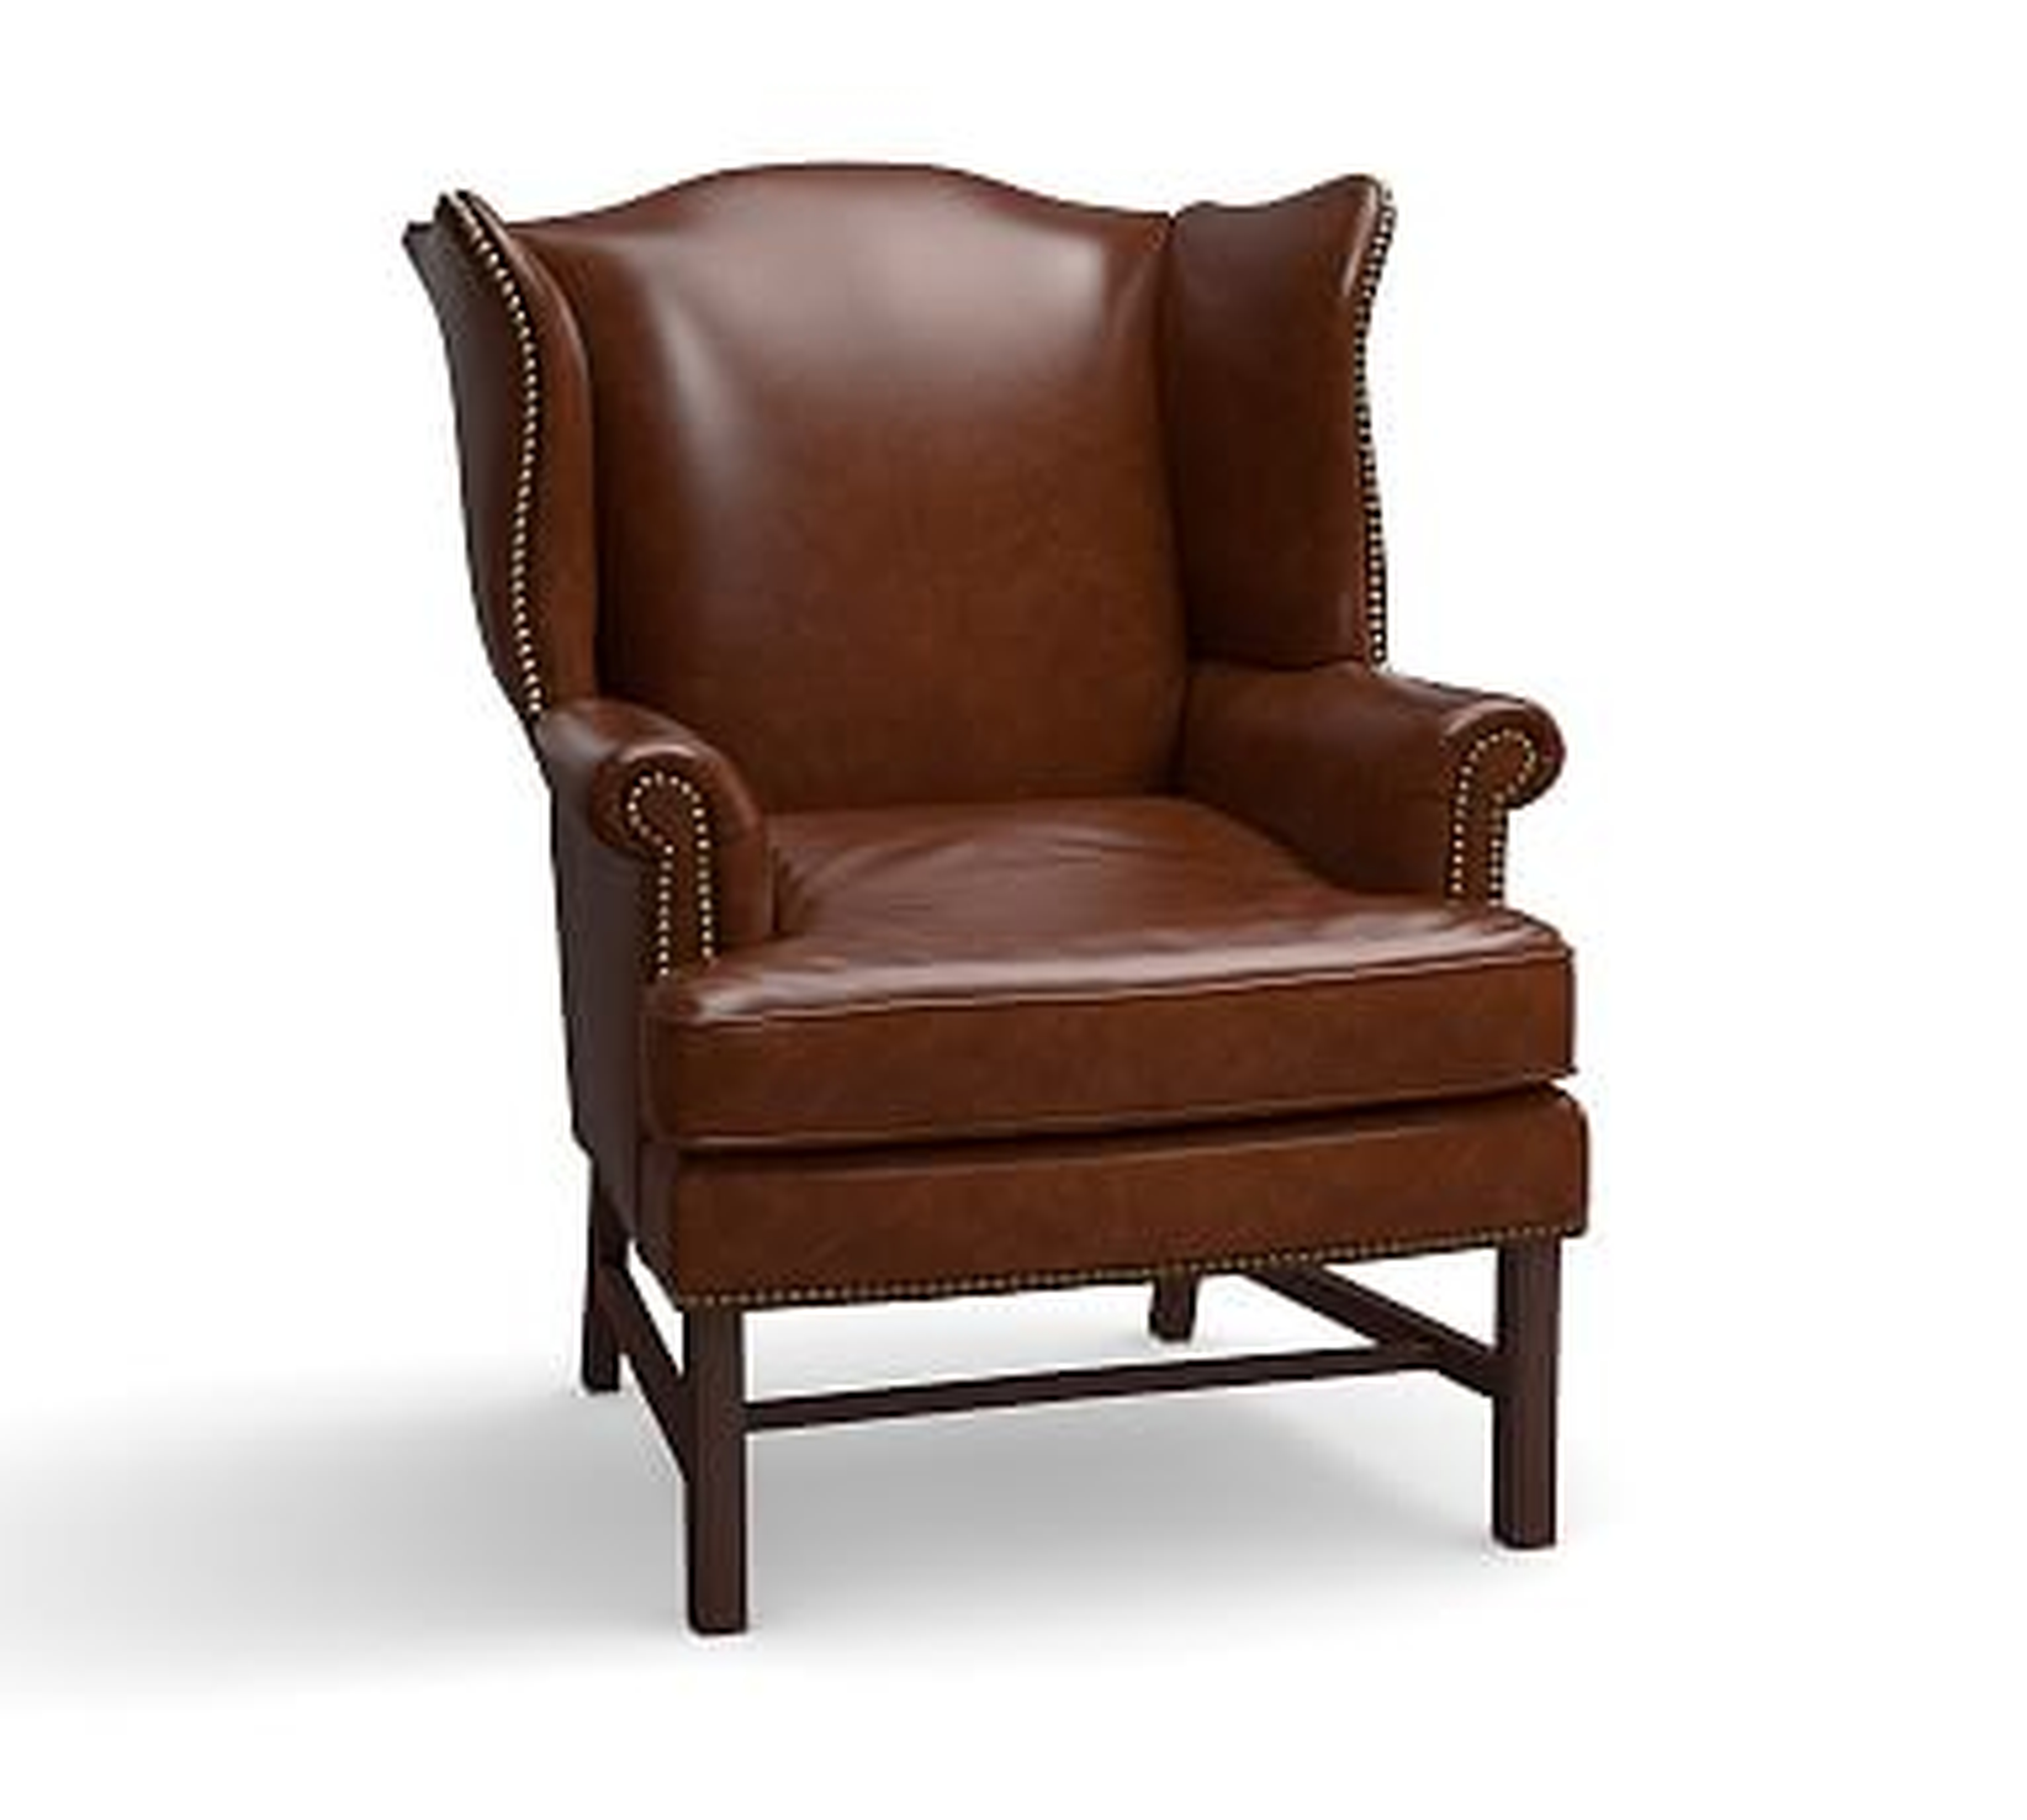 Thatcher Leather Armchair, Polyester Wrapped Cushions, Leather Statesville Molasses - Pottery Barn